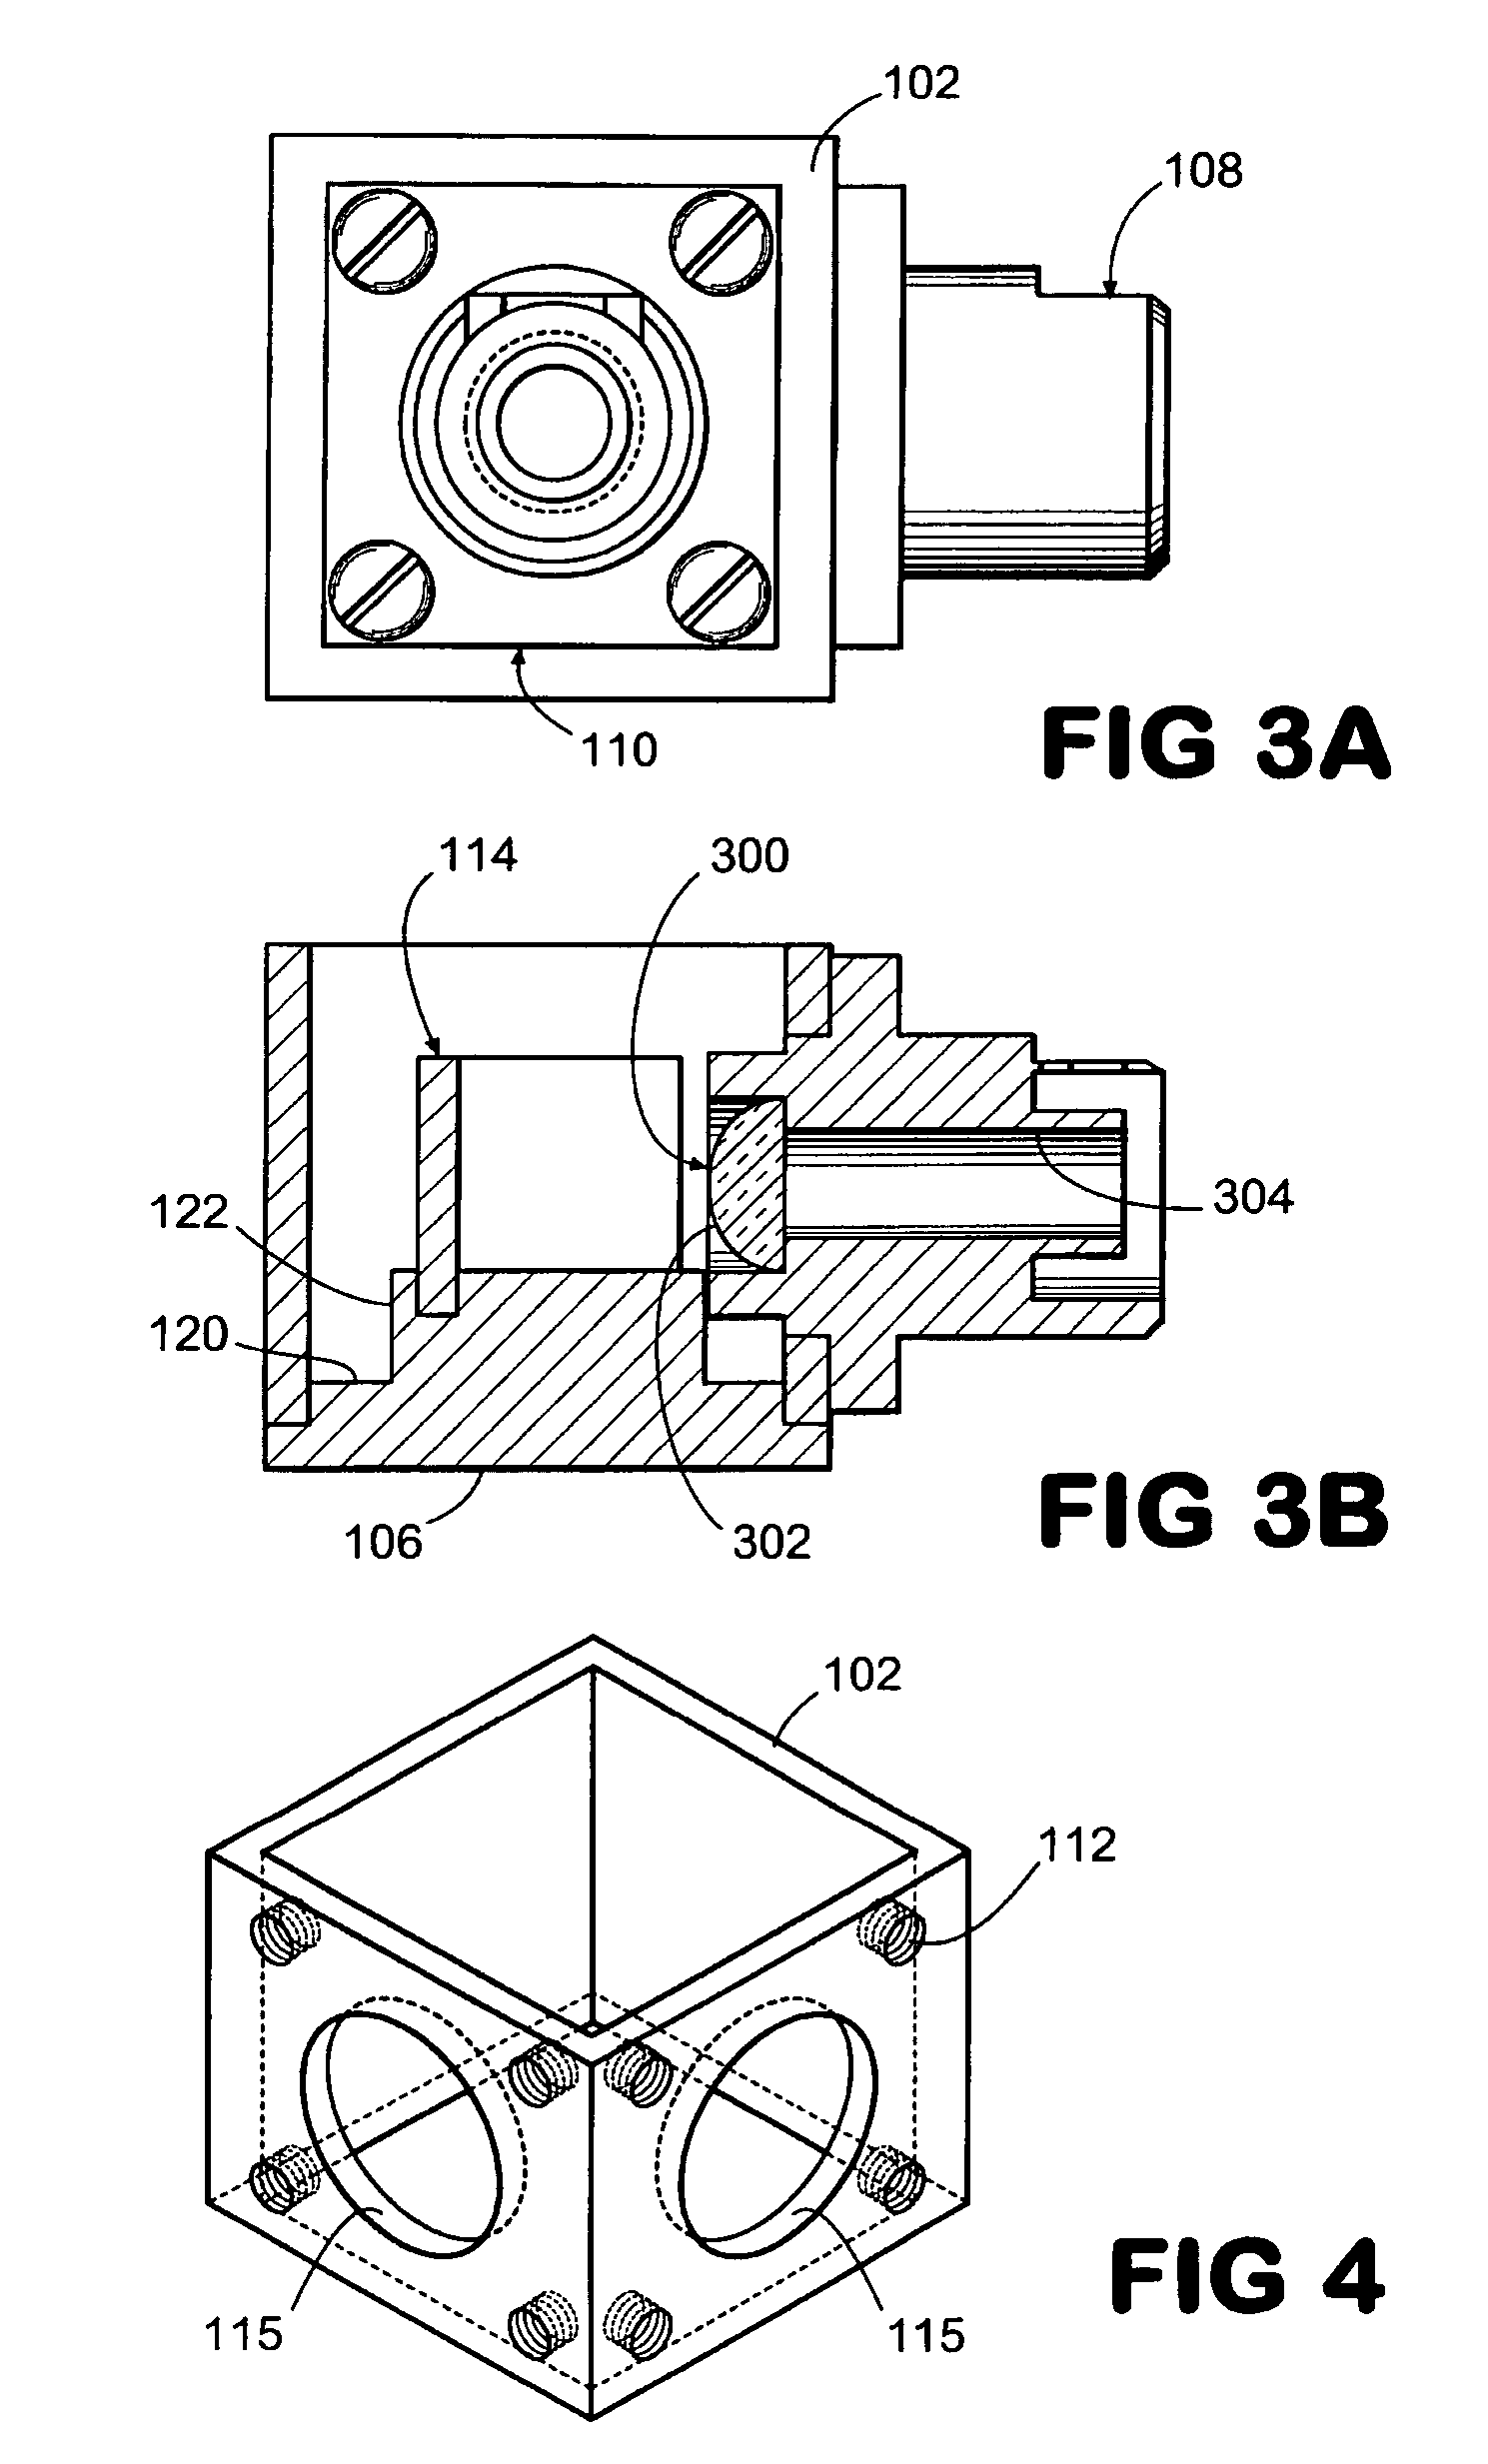 System and method for coupling and redirecting optical energy between two optical waveguides oriented at a predetermined angle